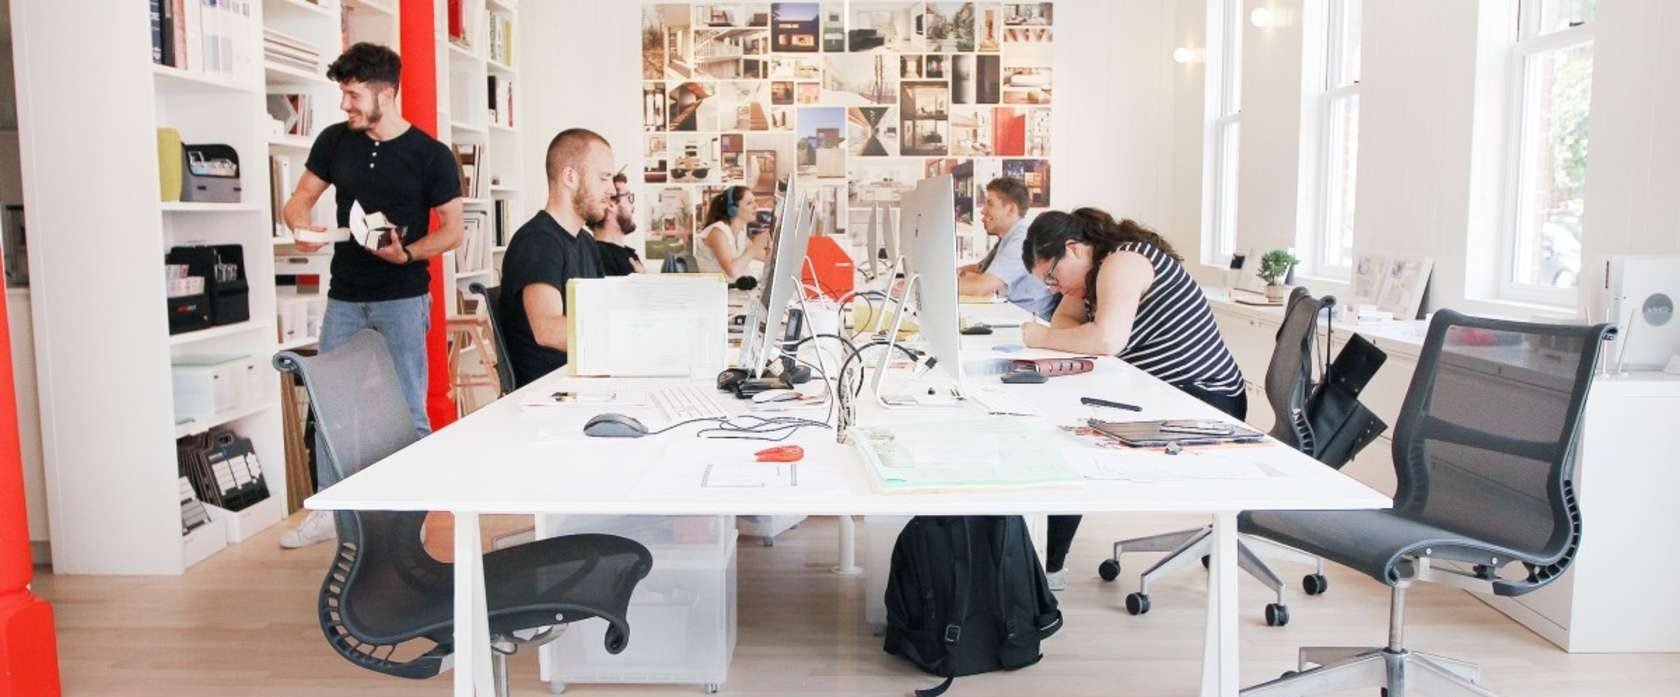 10 Reasons for Young Architects to Work in Small Architecture Firms - Arch2O.com